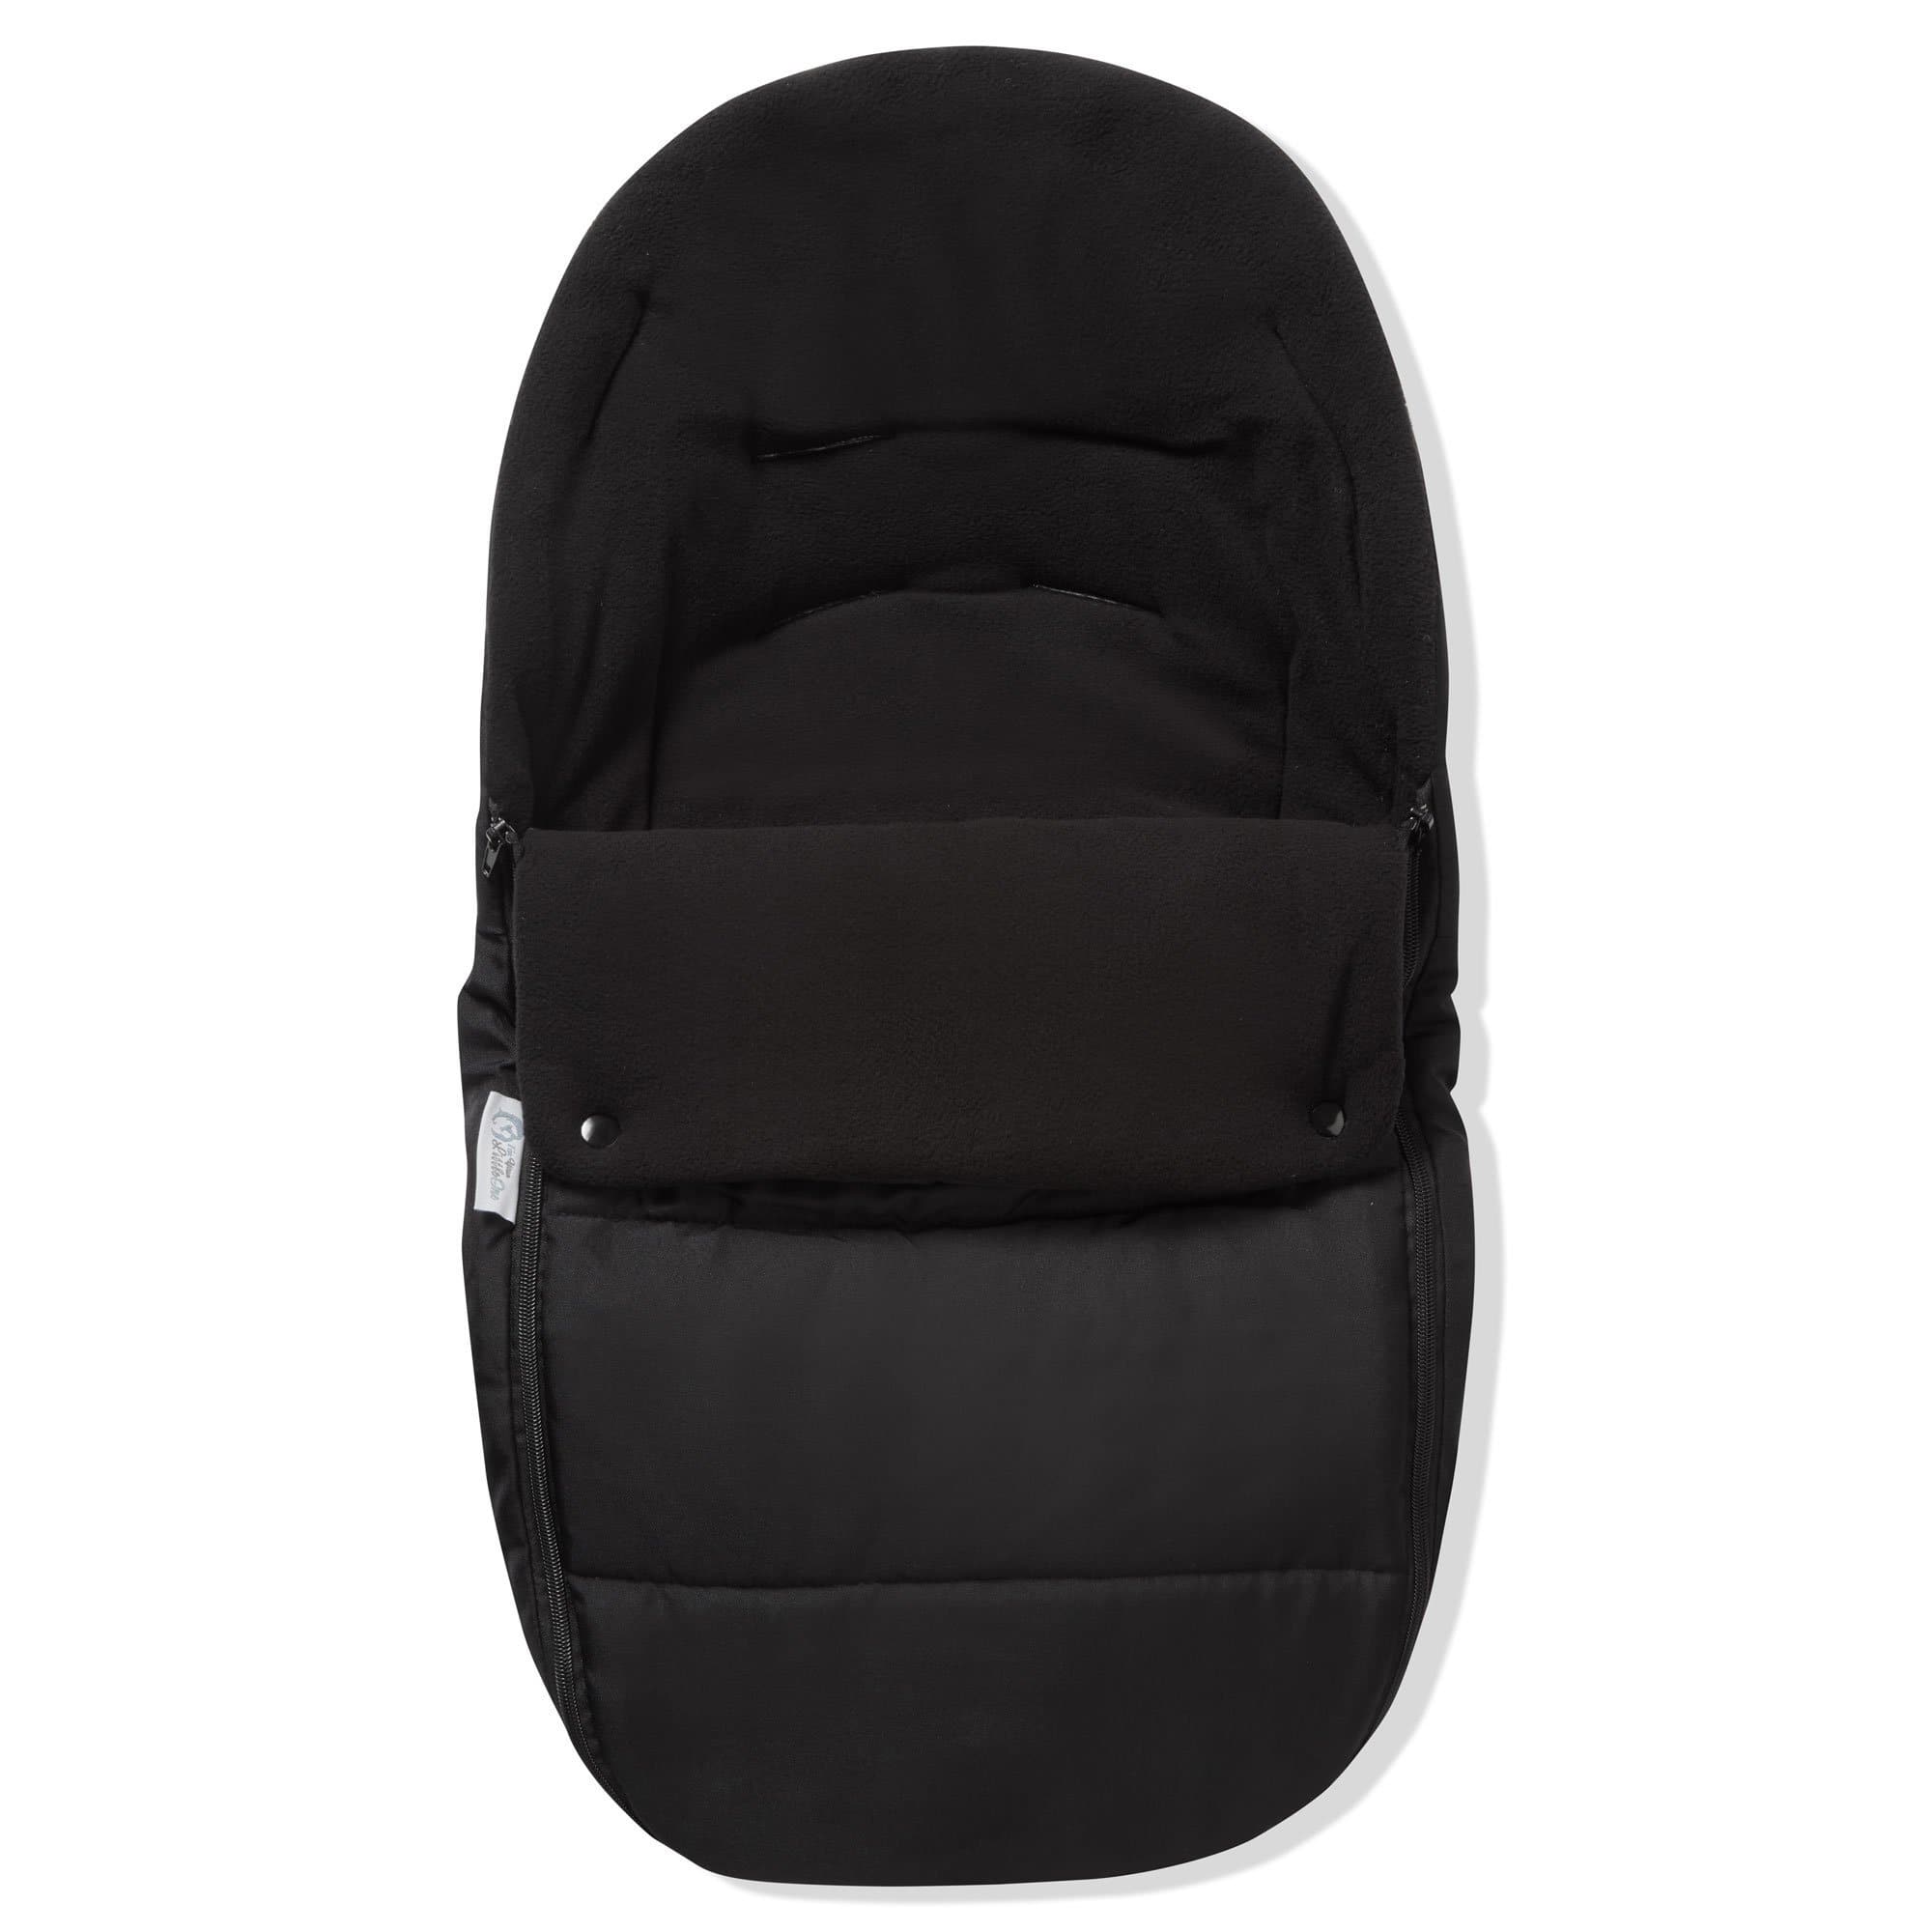 Premium Car Seat Footmuff / Cosy Toes Compatible With Kiddy - Black Jack / Fits All Models | For Your Little One